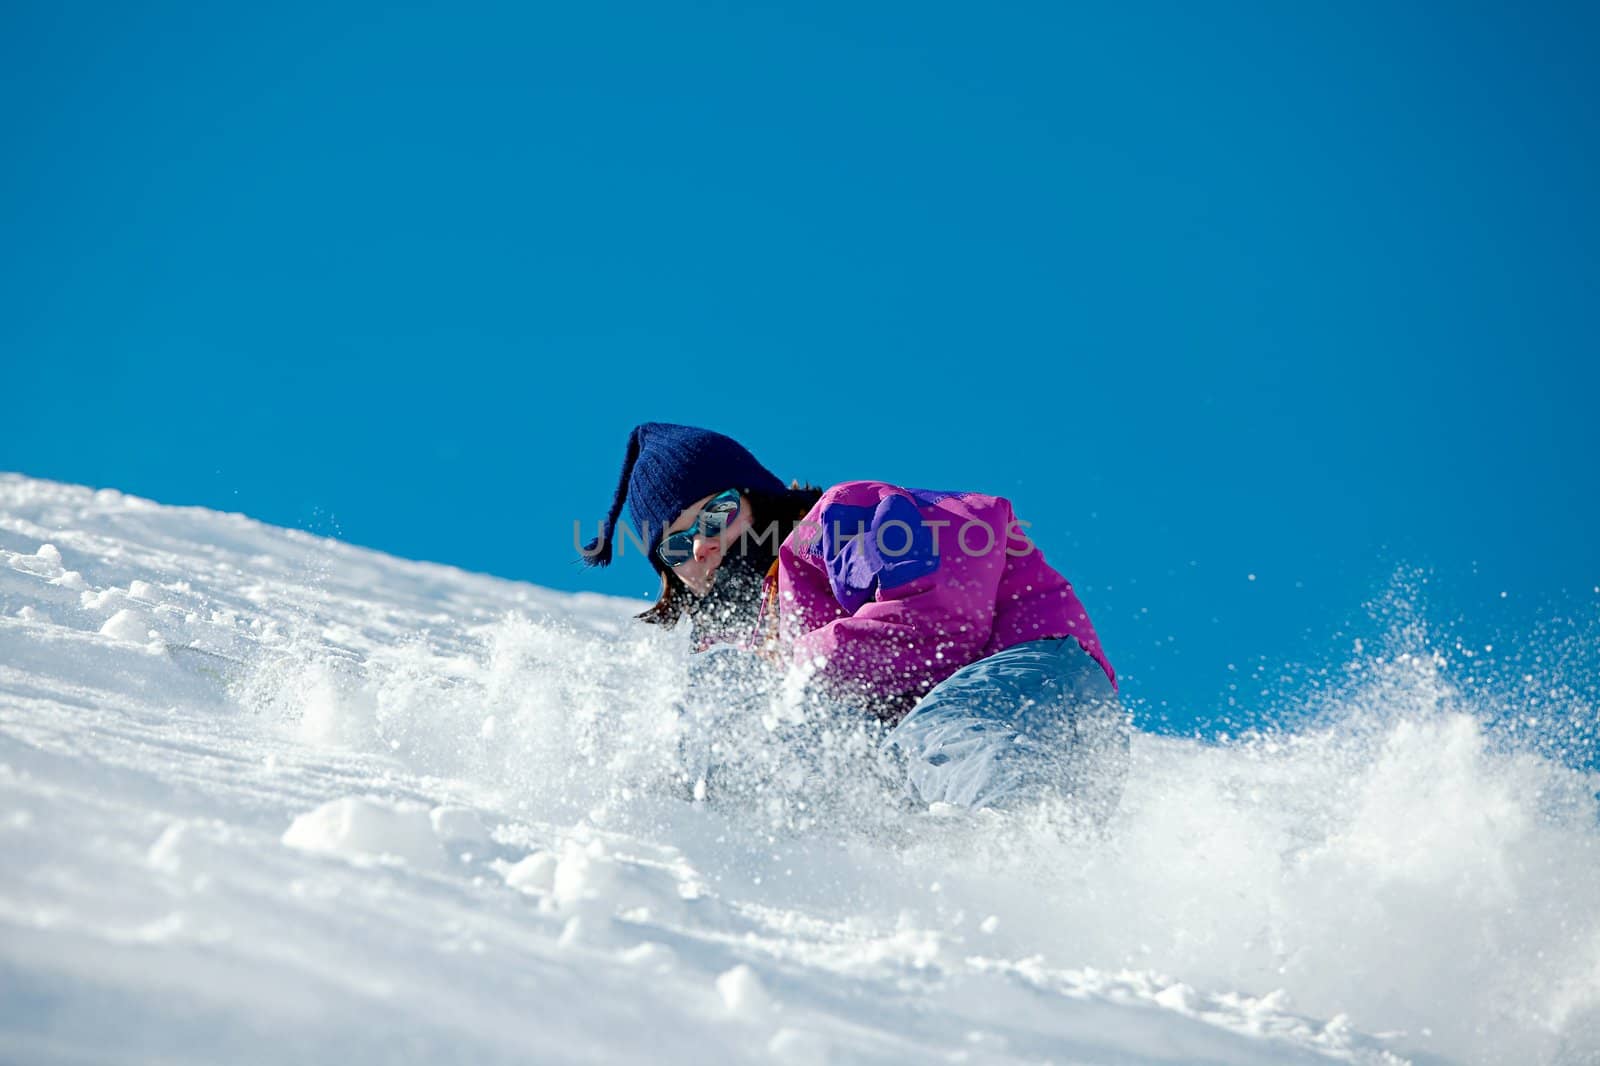 Skier coming down a steep slope